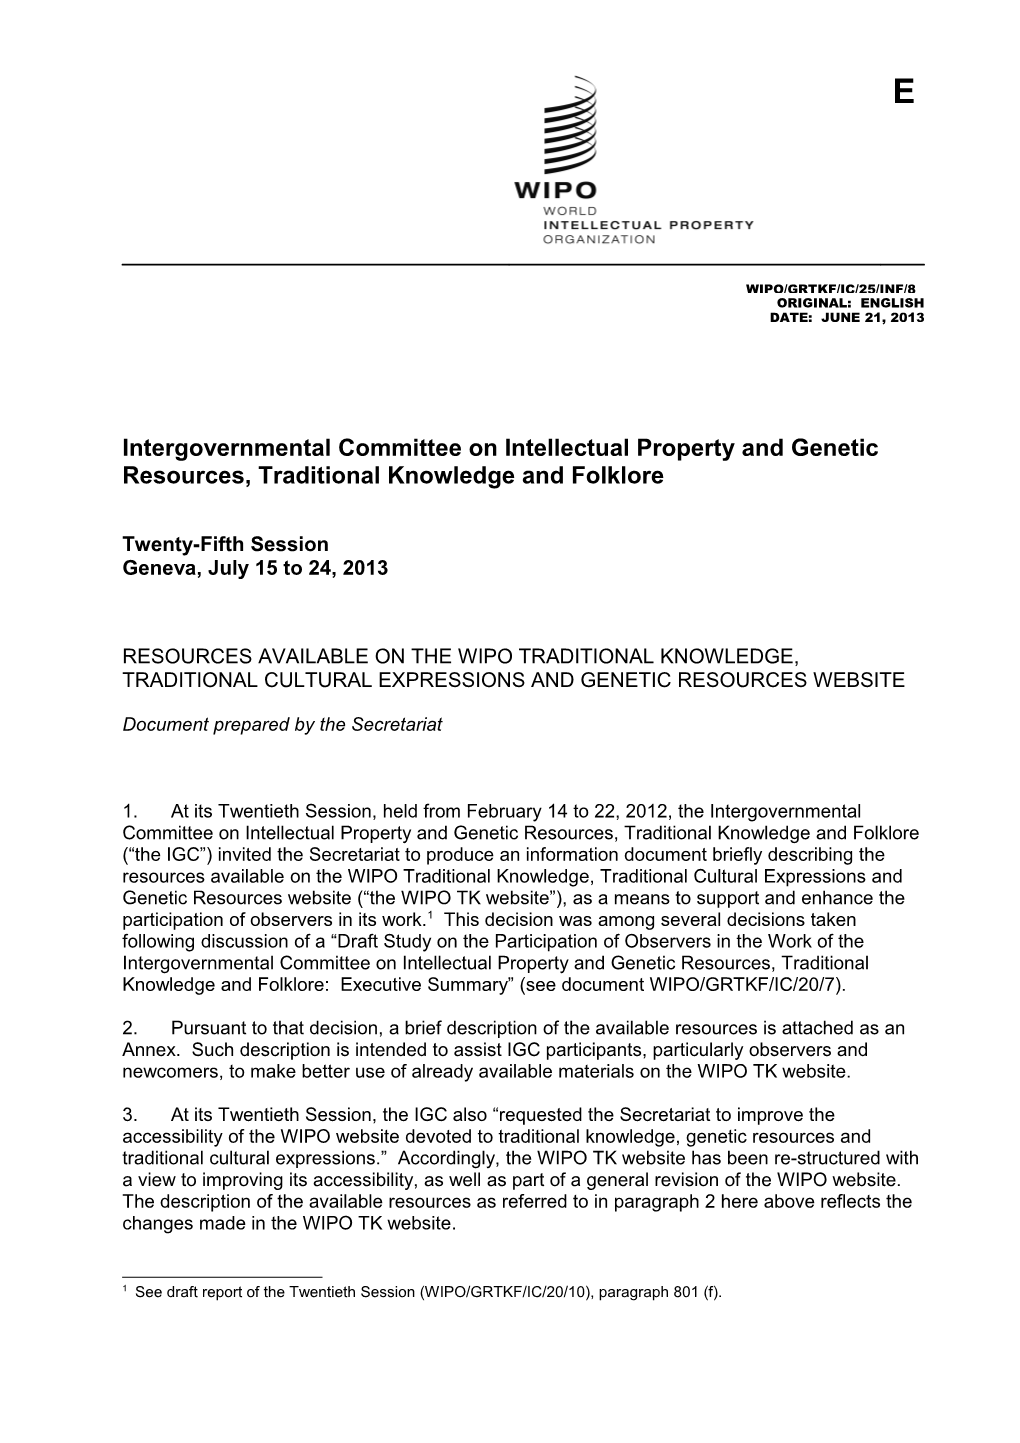 Intergovernmental Committee on Intellectual Property and Genetic Resources, Traditional s8